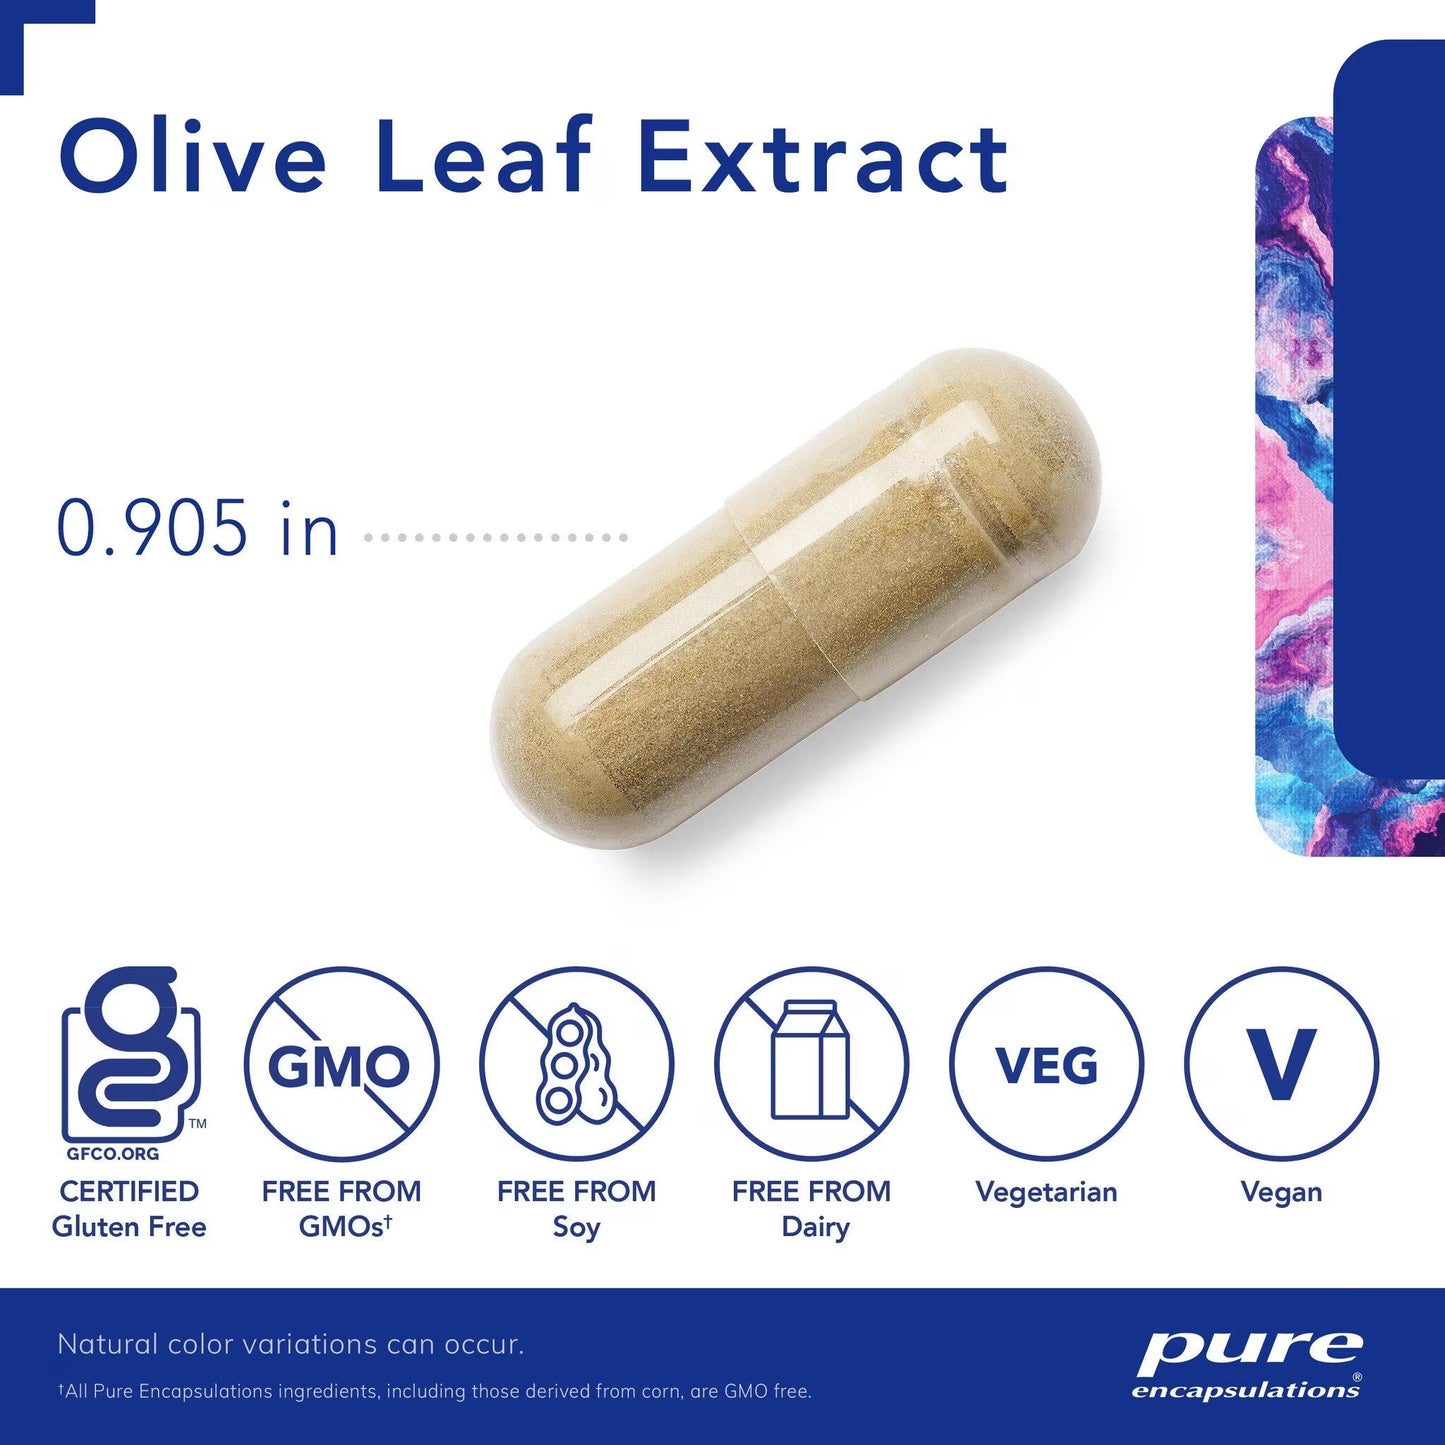 Olive Leaf Extract 120 ct.